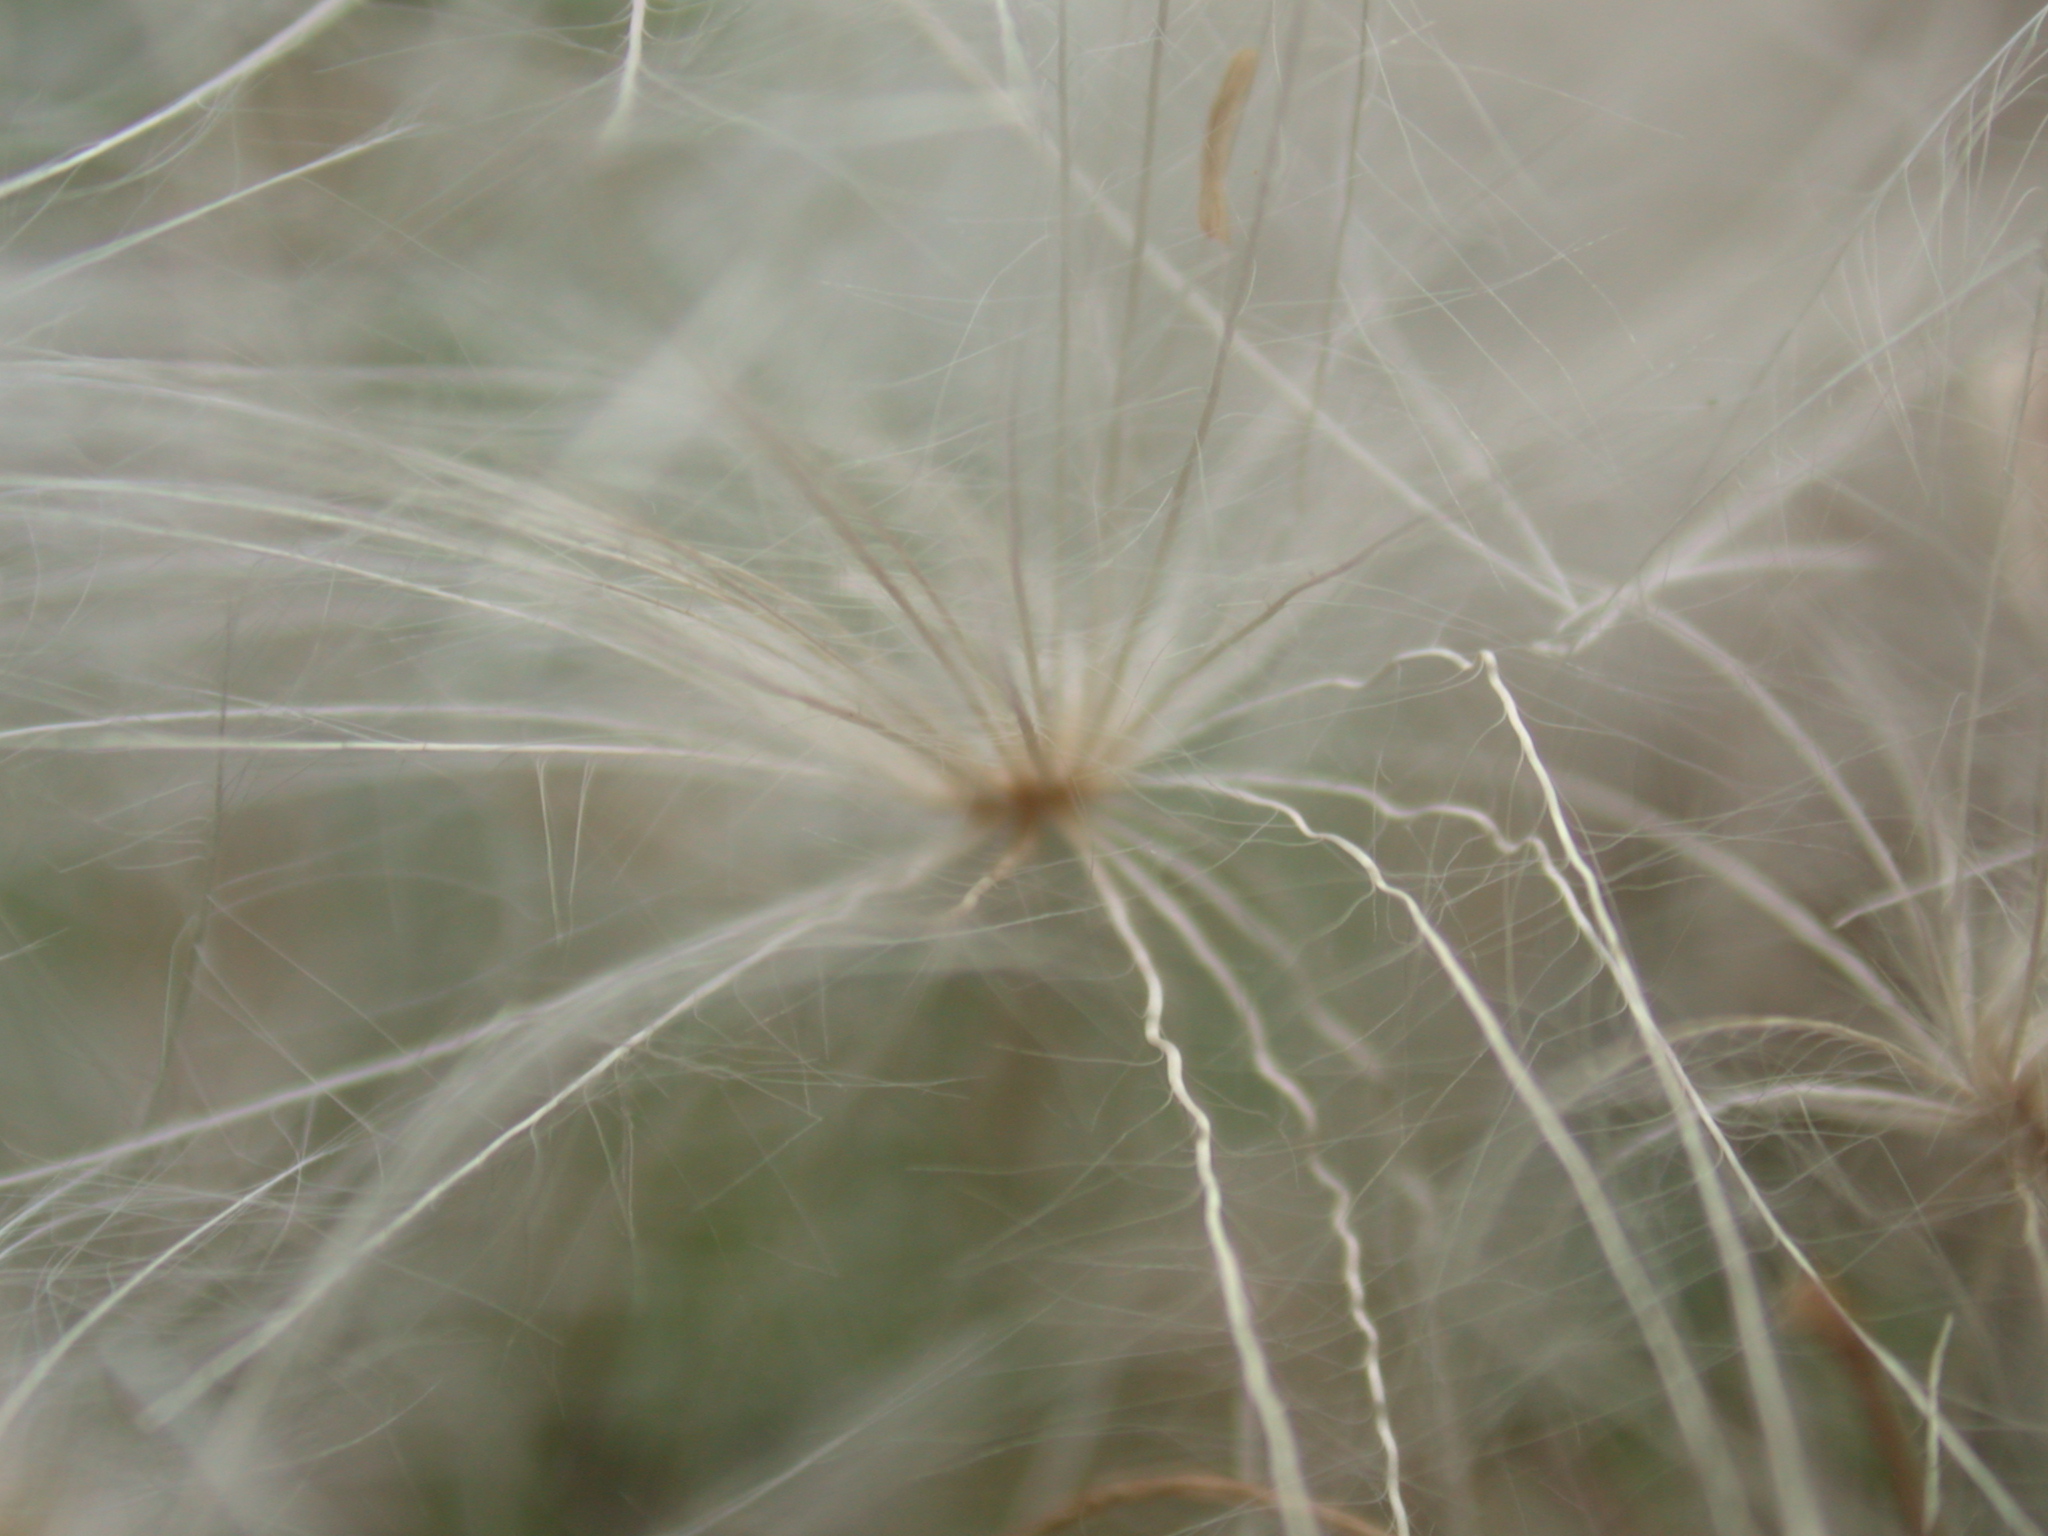 poppy seeds seed wiry bloomed autumn grey white strings stringy web webbing threads spider's